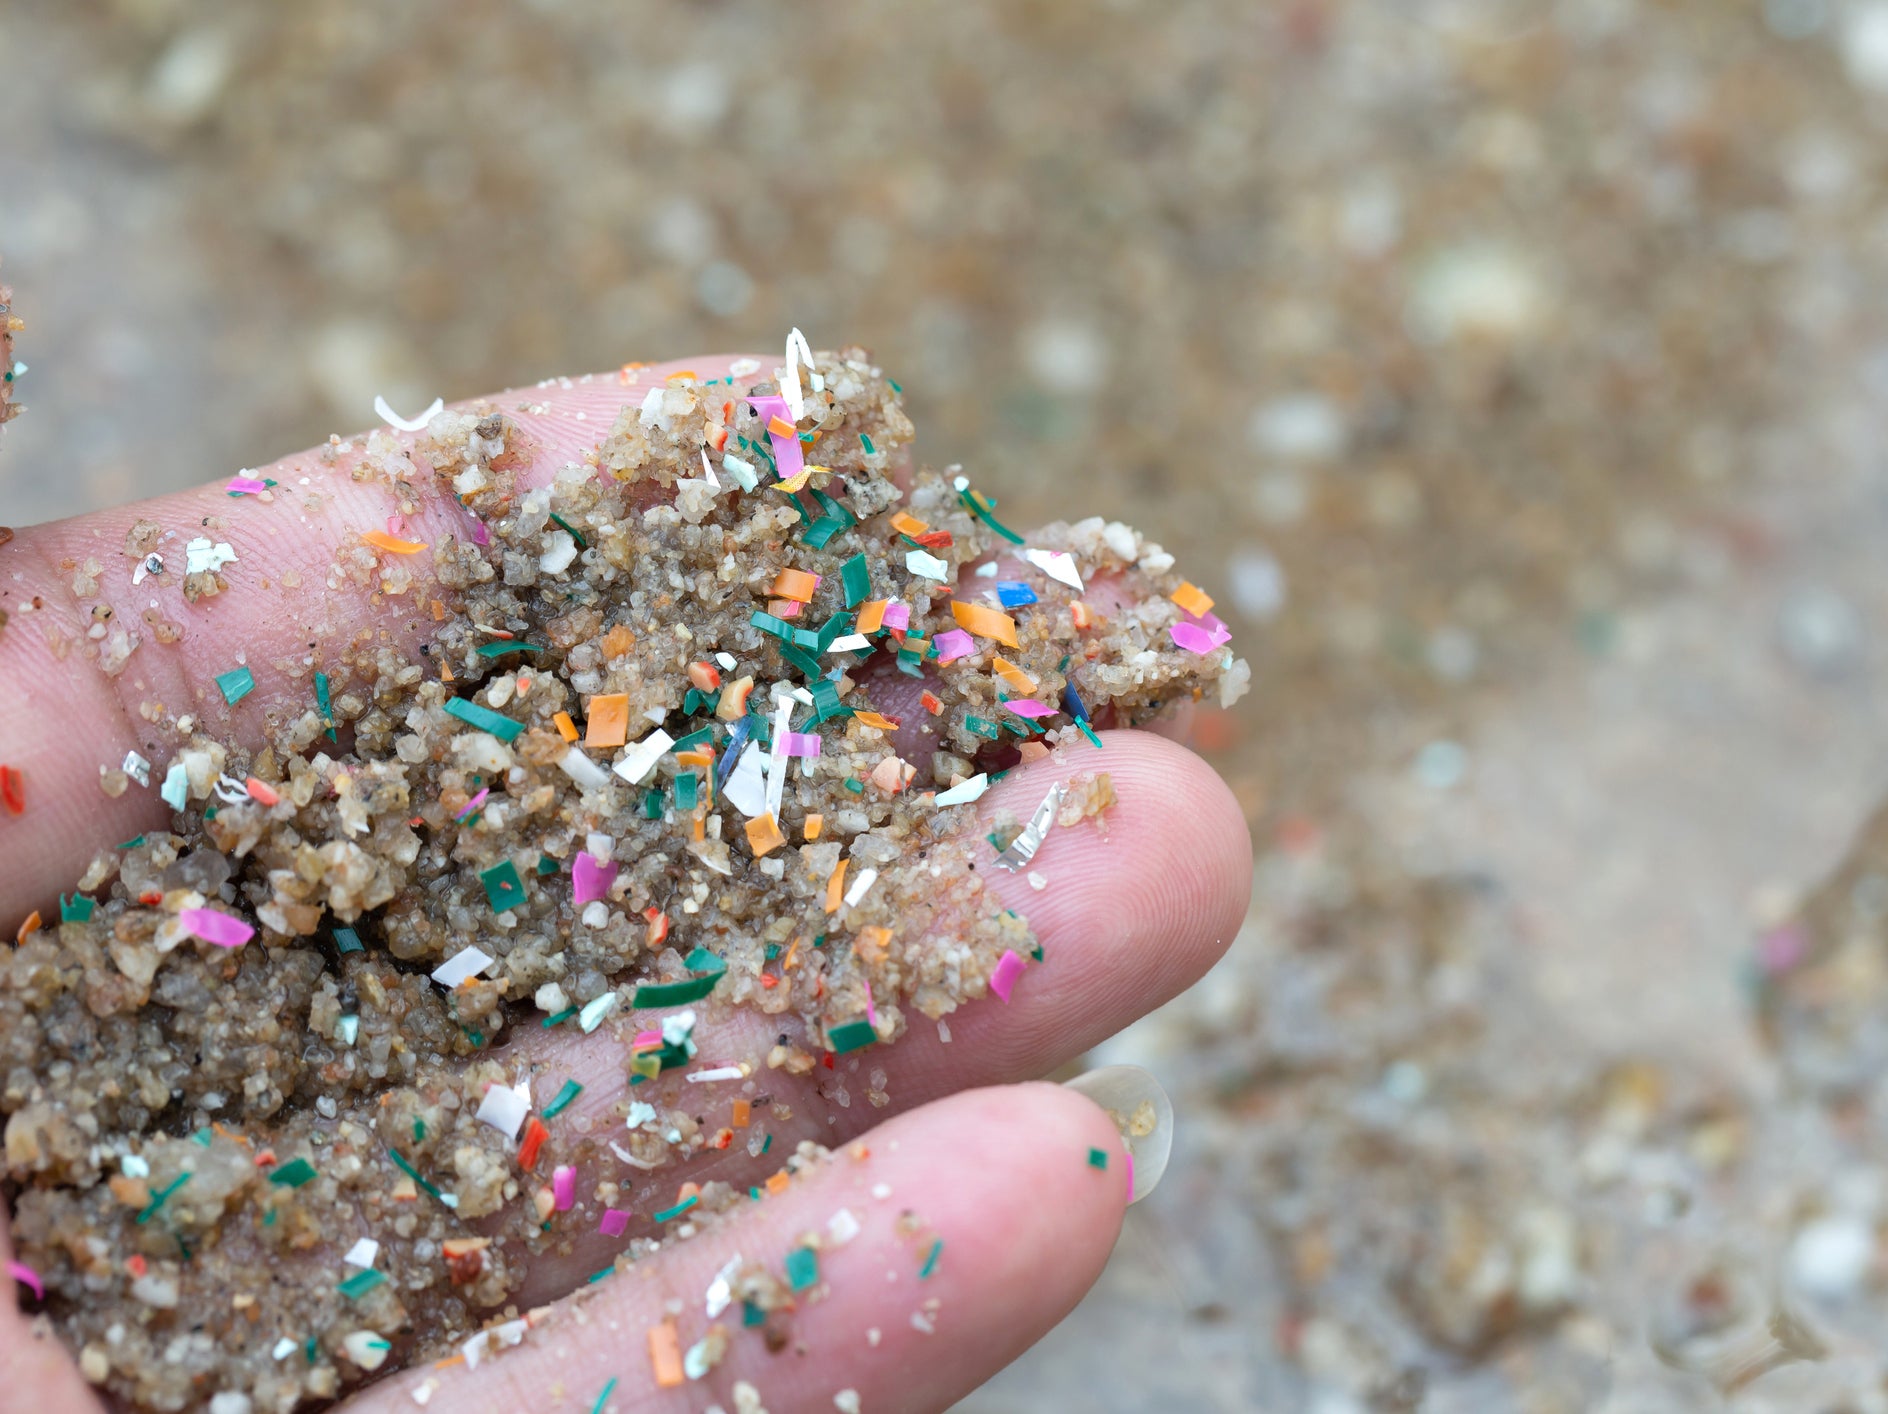 Microplastics have been found deep inside the ocean and mixed with sand. This close-up side shot of hands shows microplastic waste contaminated with the seaside sand